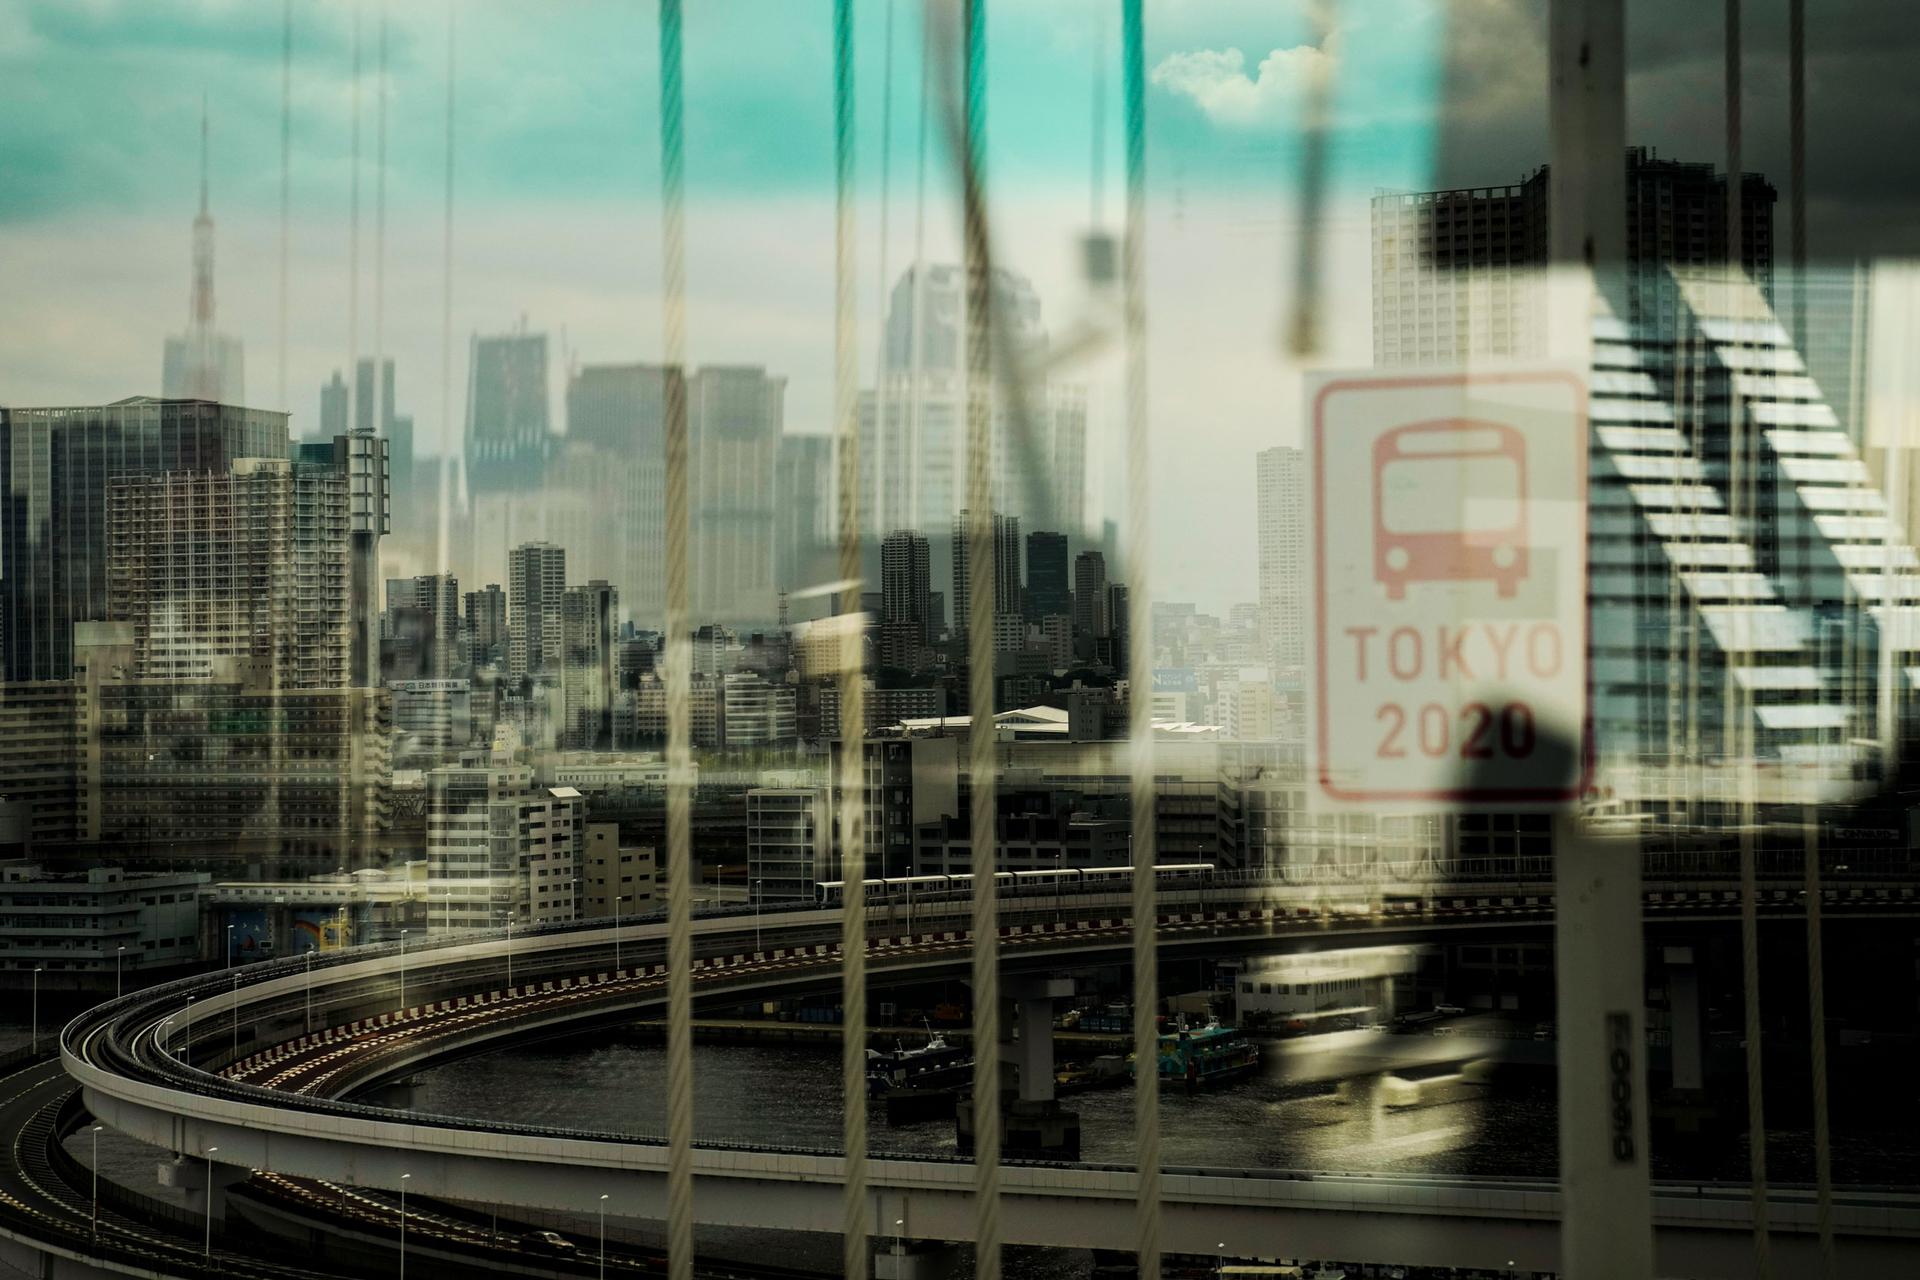 A major roadway and elevated train track along with the Tokyo skyline are shown blurred slightly via a bus window.